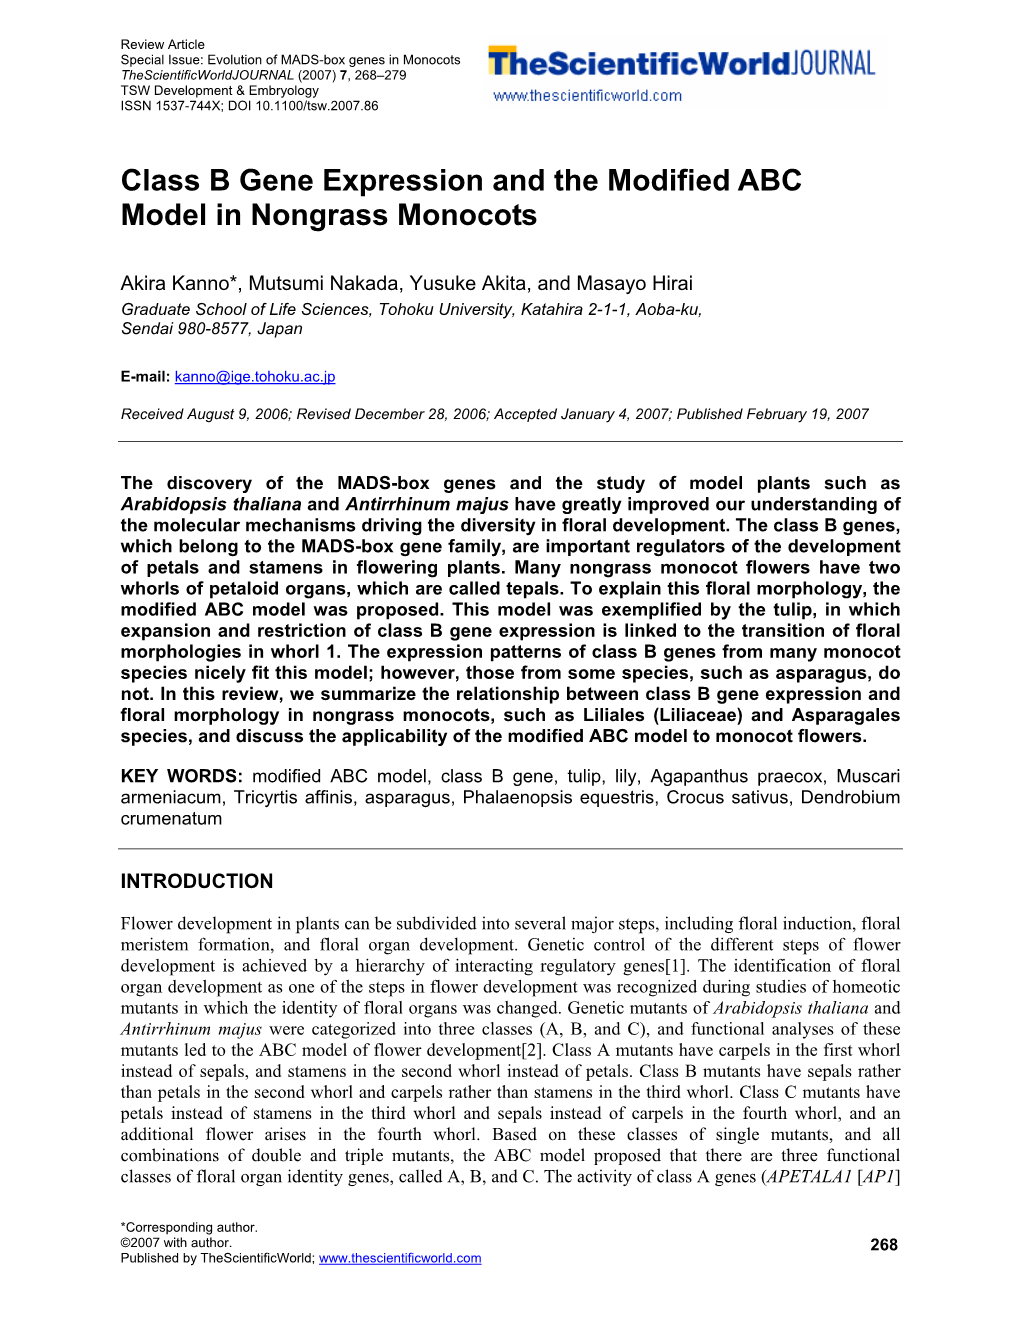 Class B Gene Expression and the Modified ABC Model in Nongrass Monocots